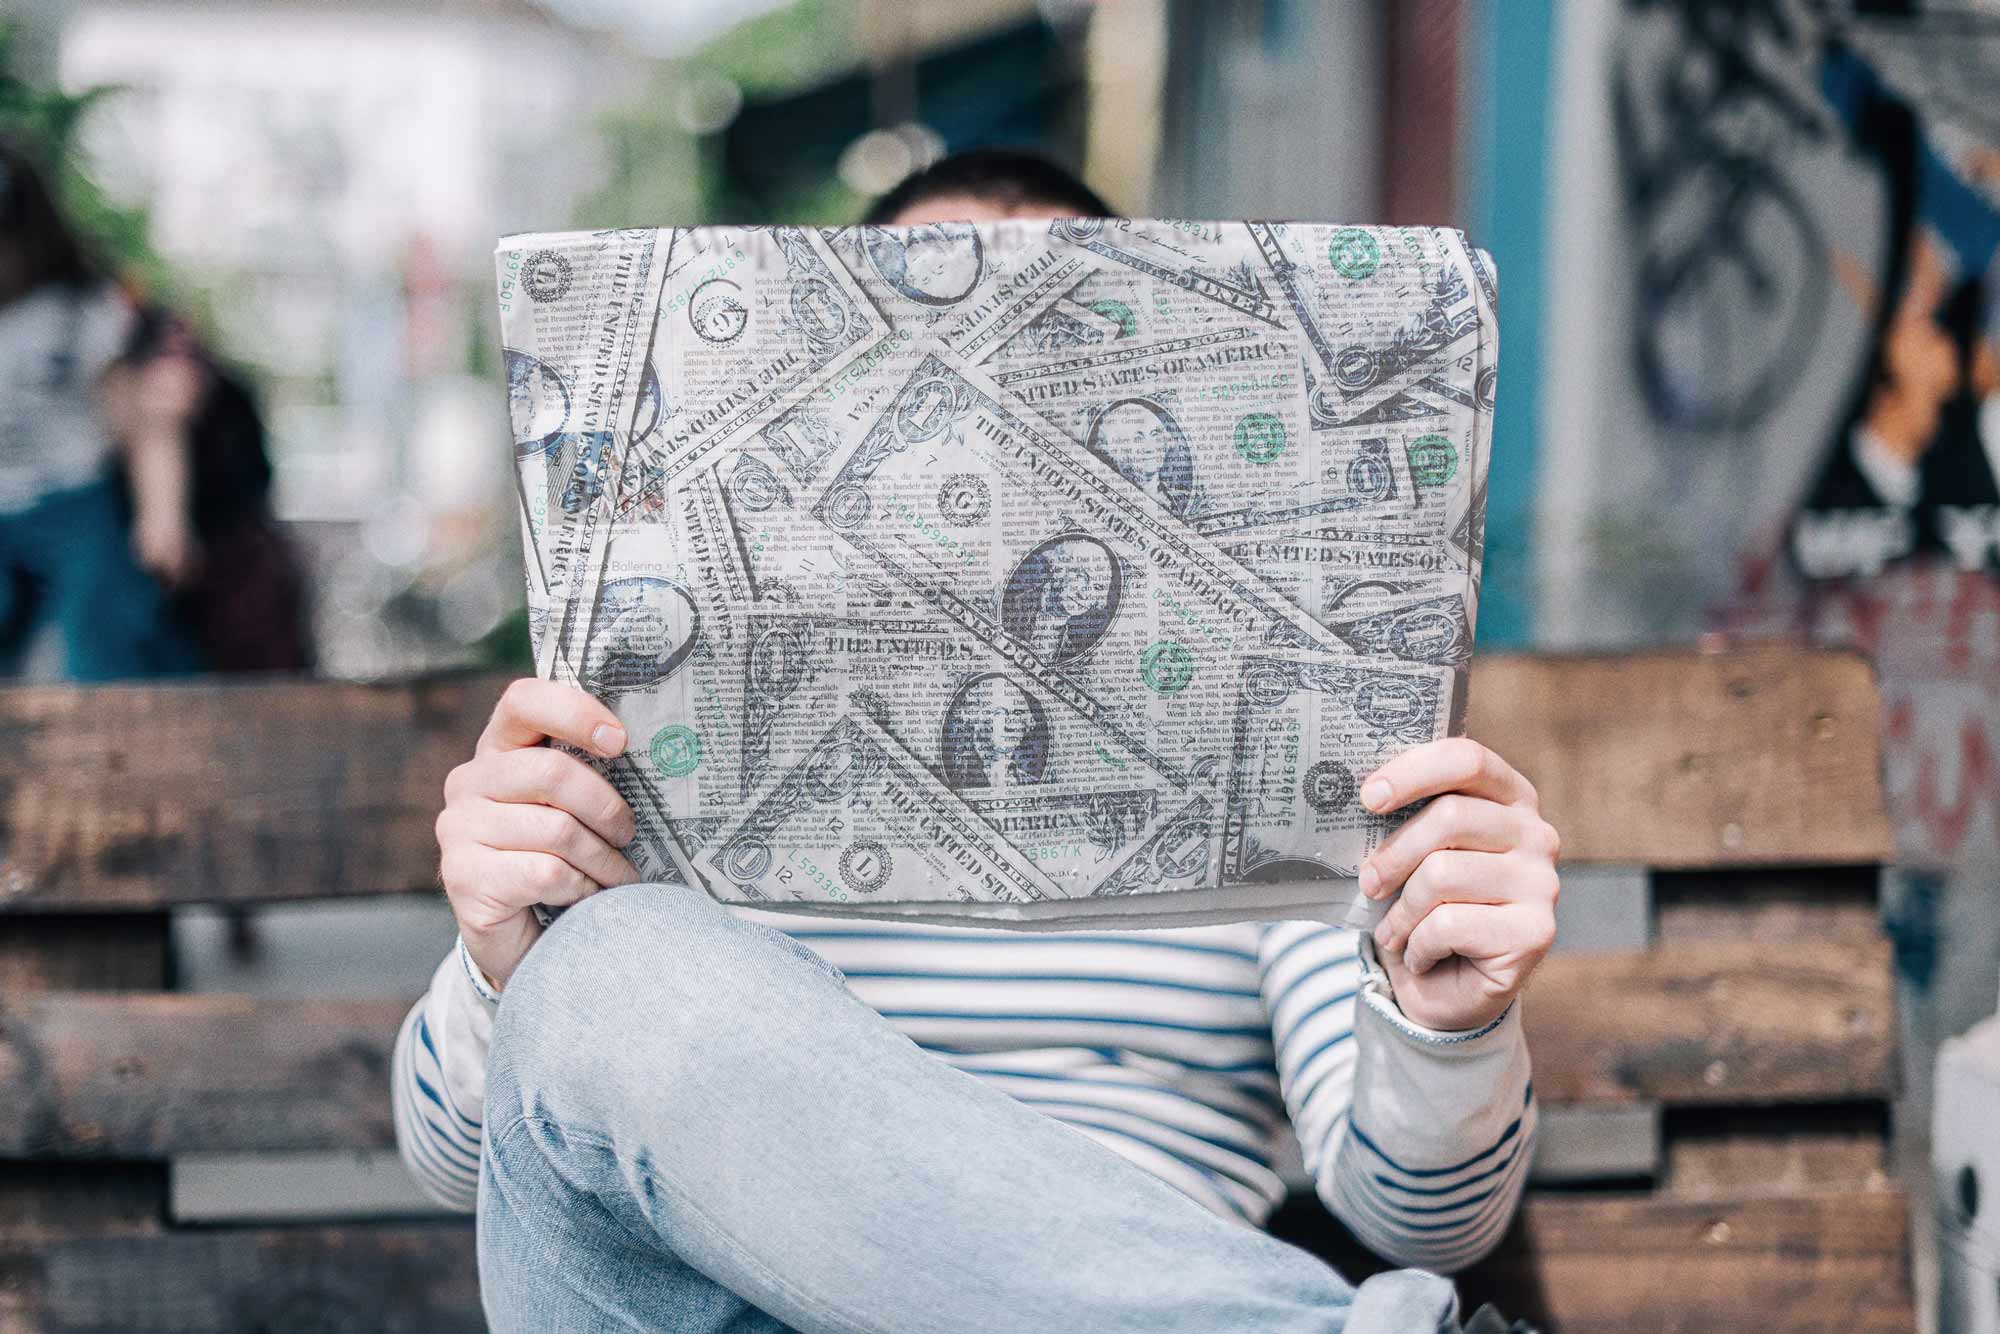 Illustration of a person reading a newspaper made out of dollars